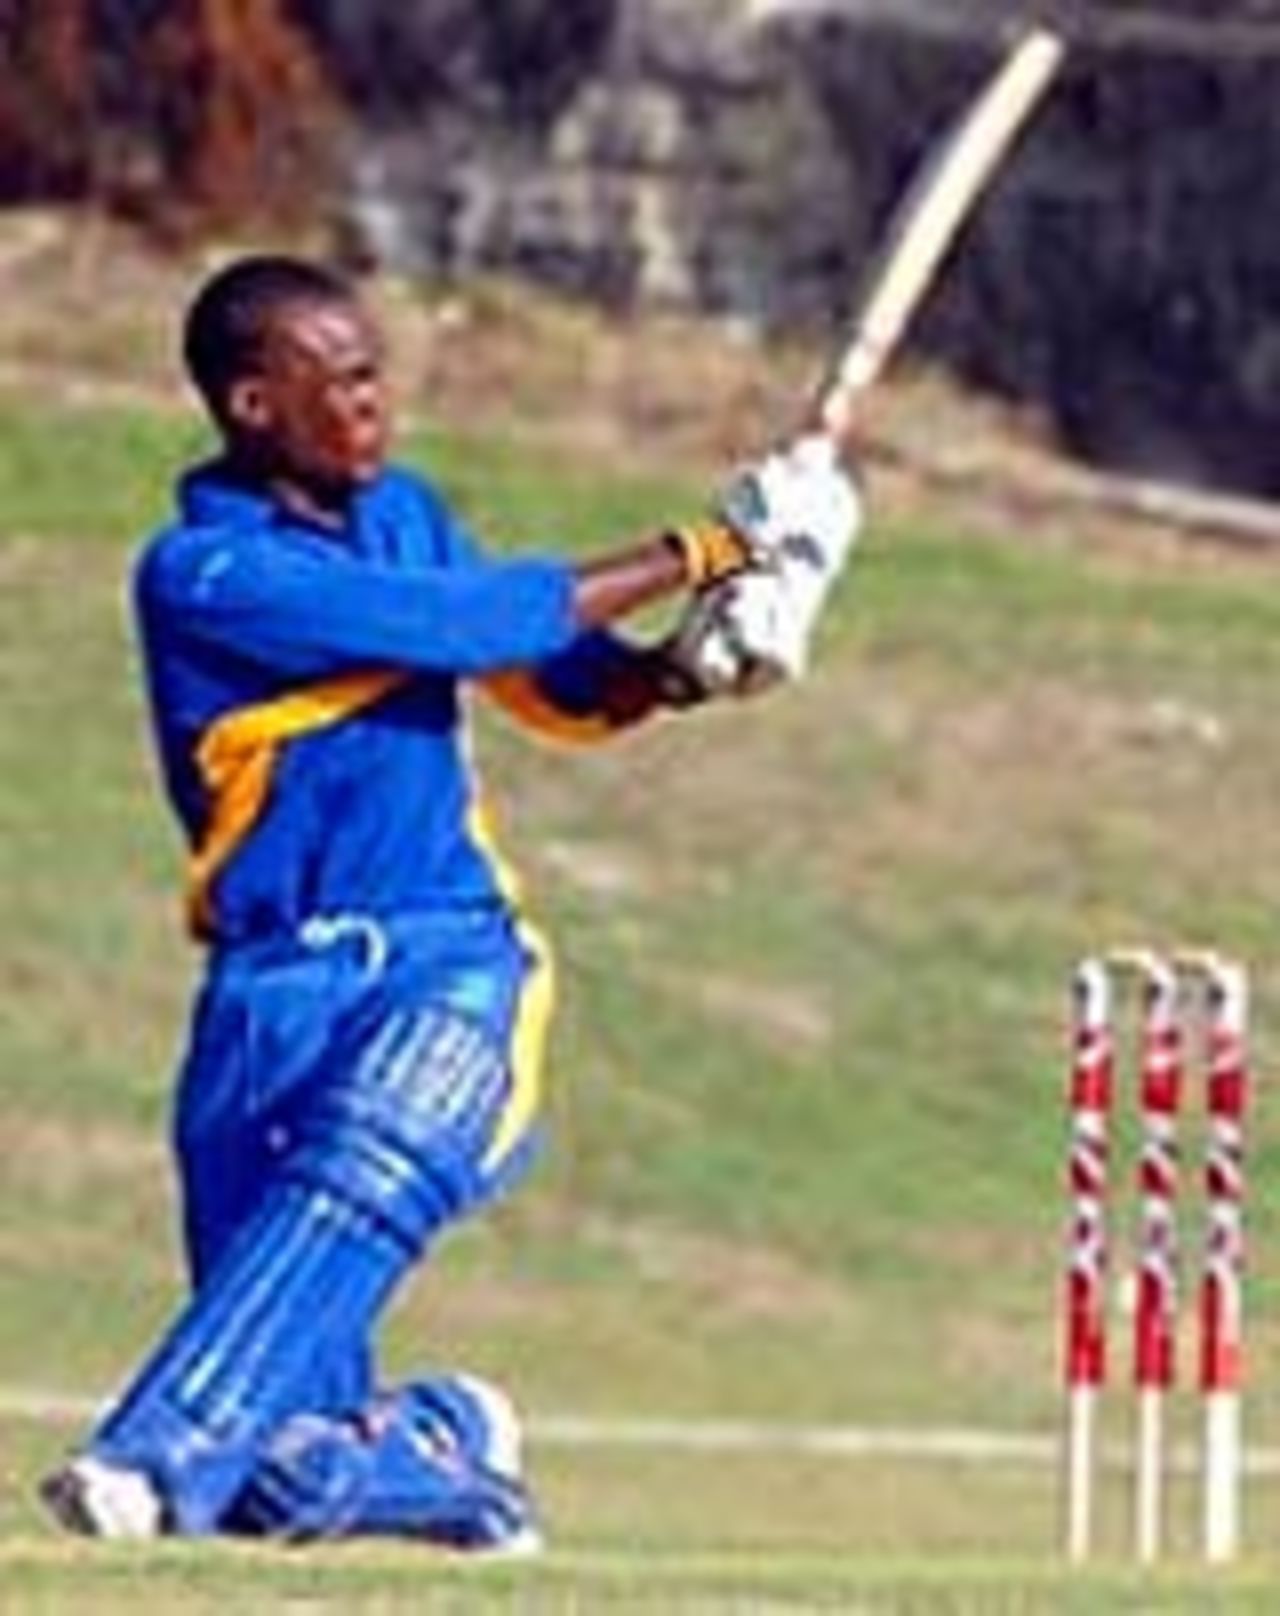 Kevin Stoute sweeps en route to his 73, Barbados v Leeward Islands, KFC Cup, January 17, 2007